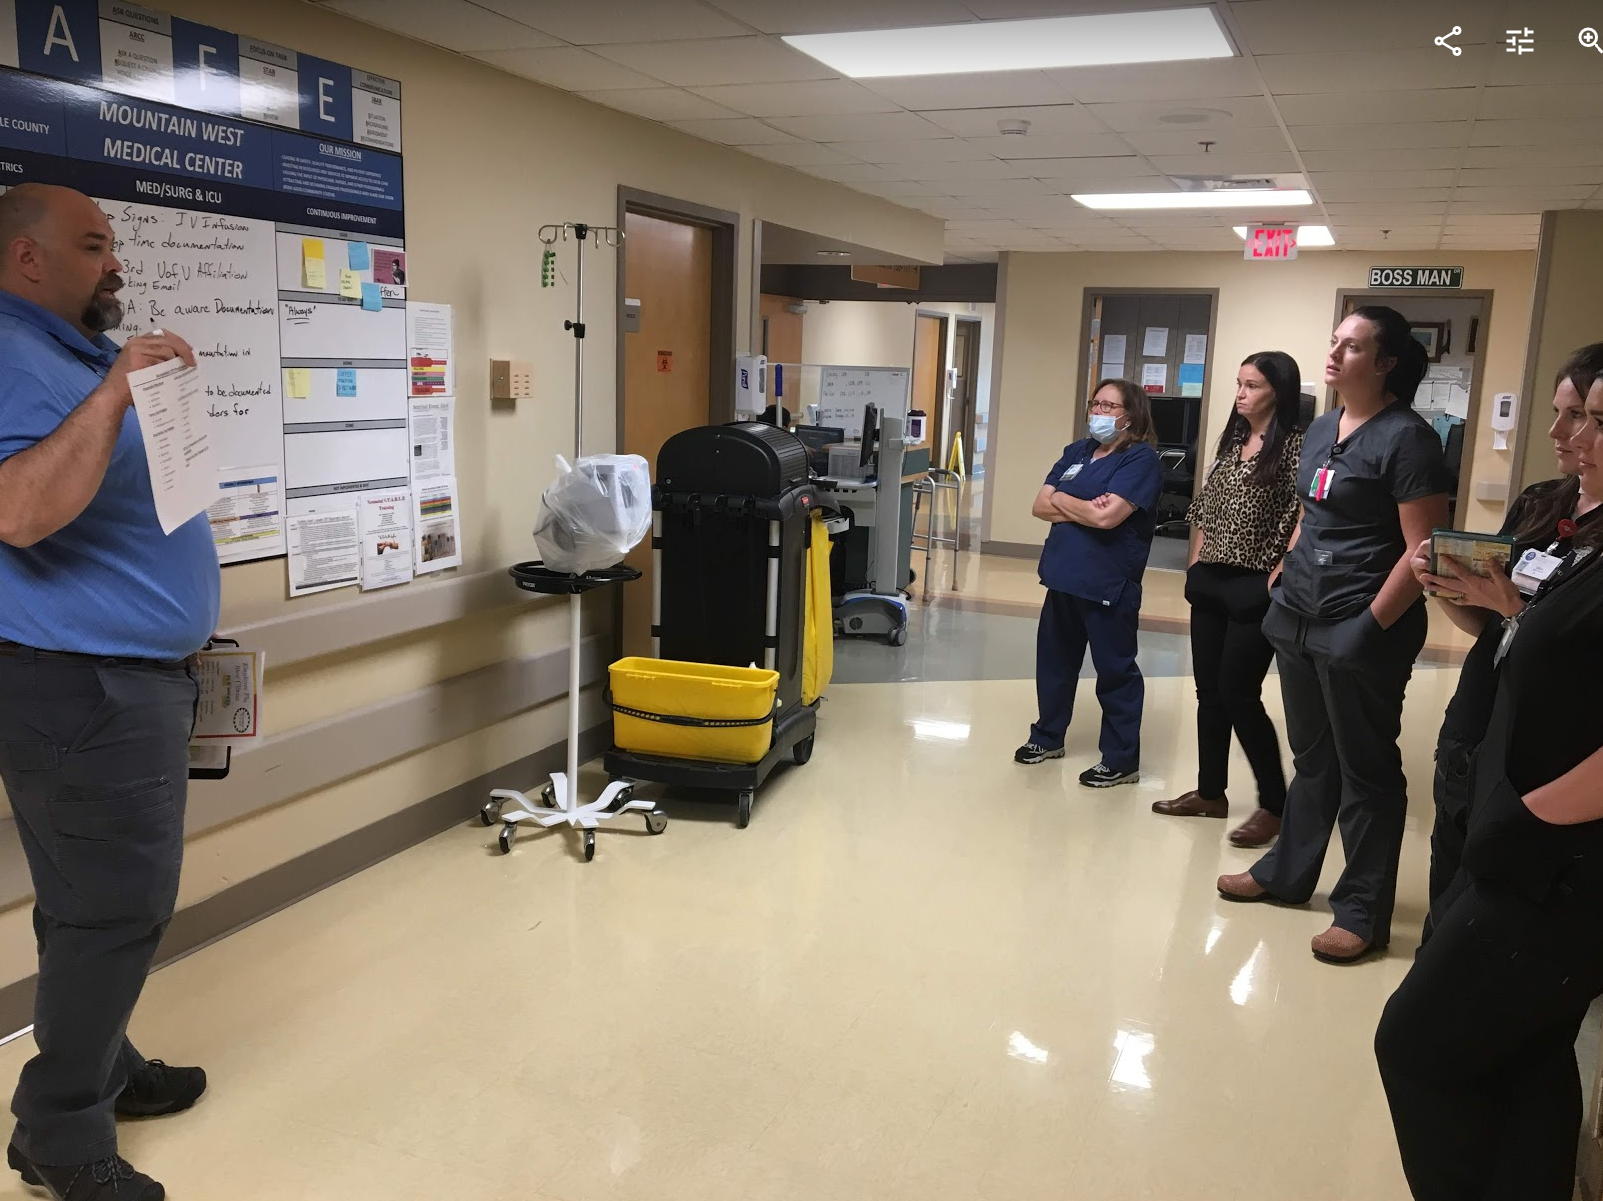 Daily huddle with the nursing staff - lean six sigma toolbox